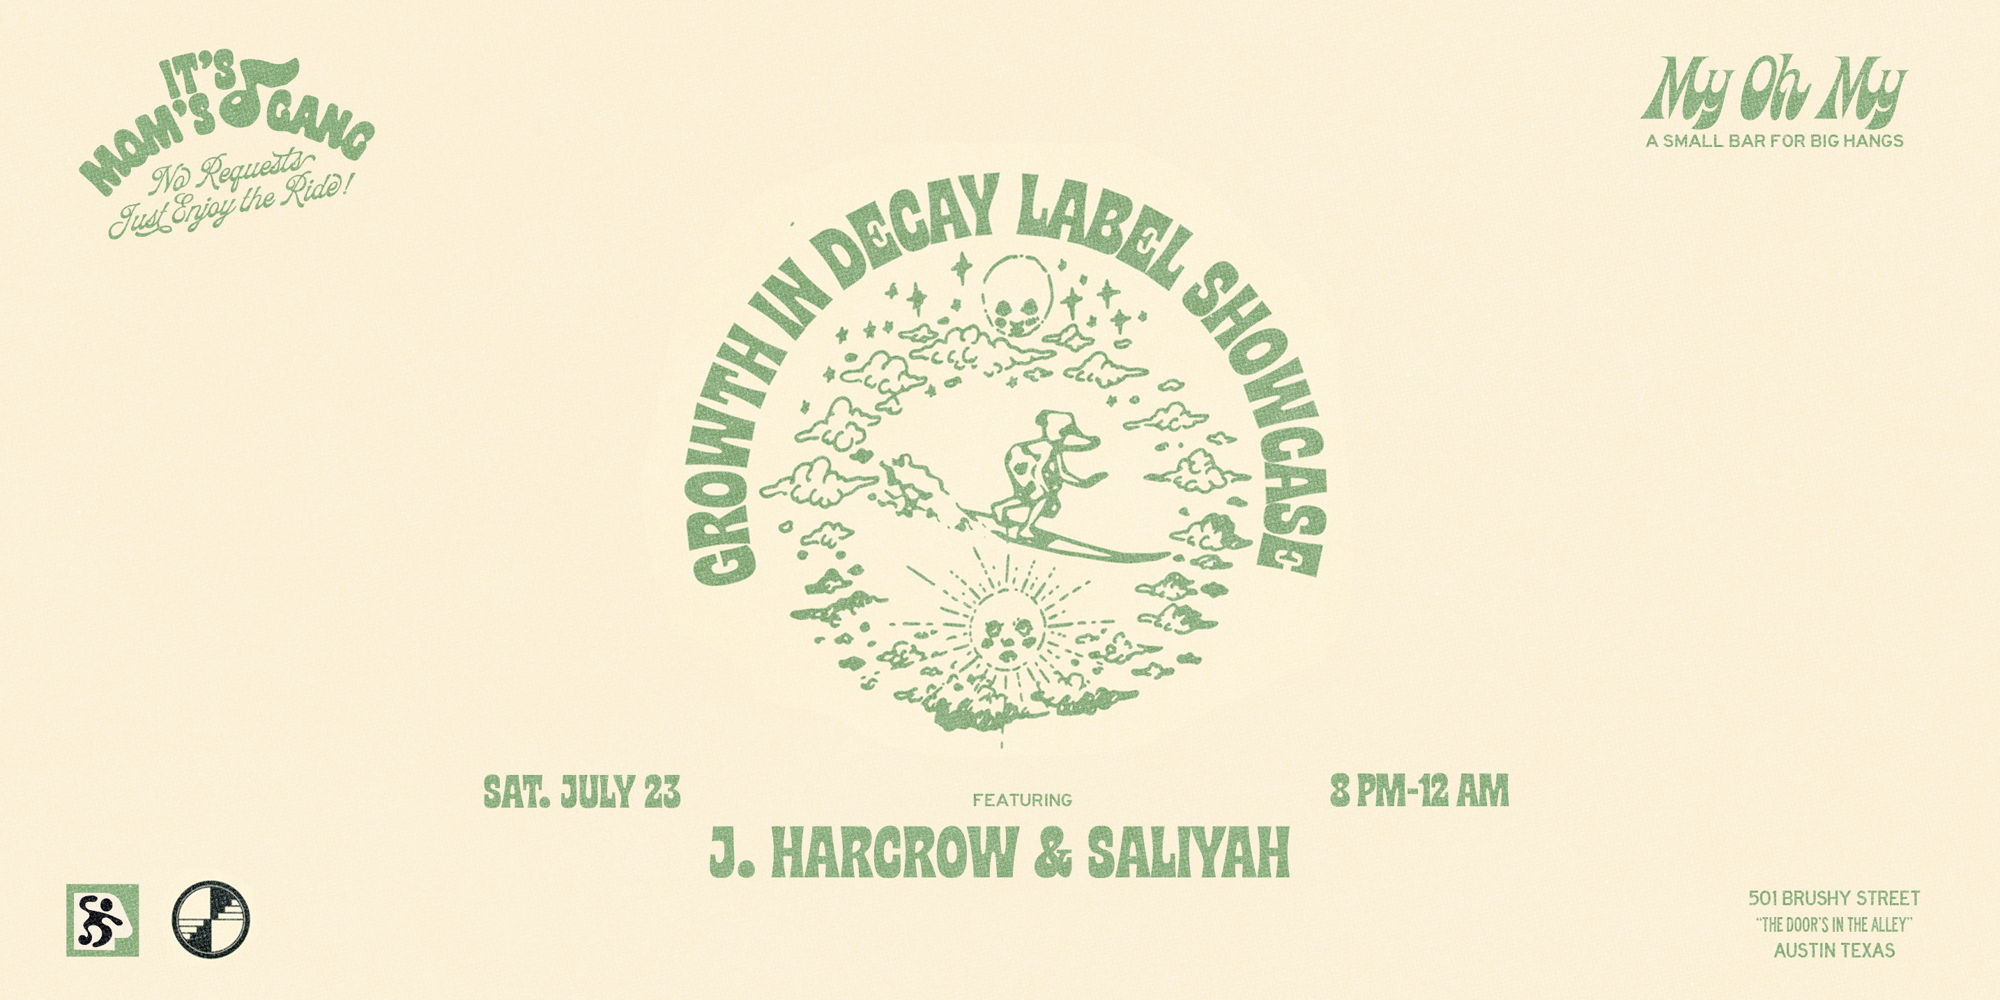 My Oh My Presents: Growth In Decay Label Showcase w/ J. Harcrow & SaliYah @ My Oh MY on July 23rd promotional image